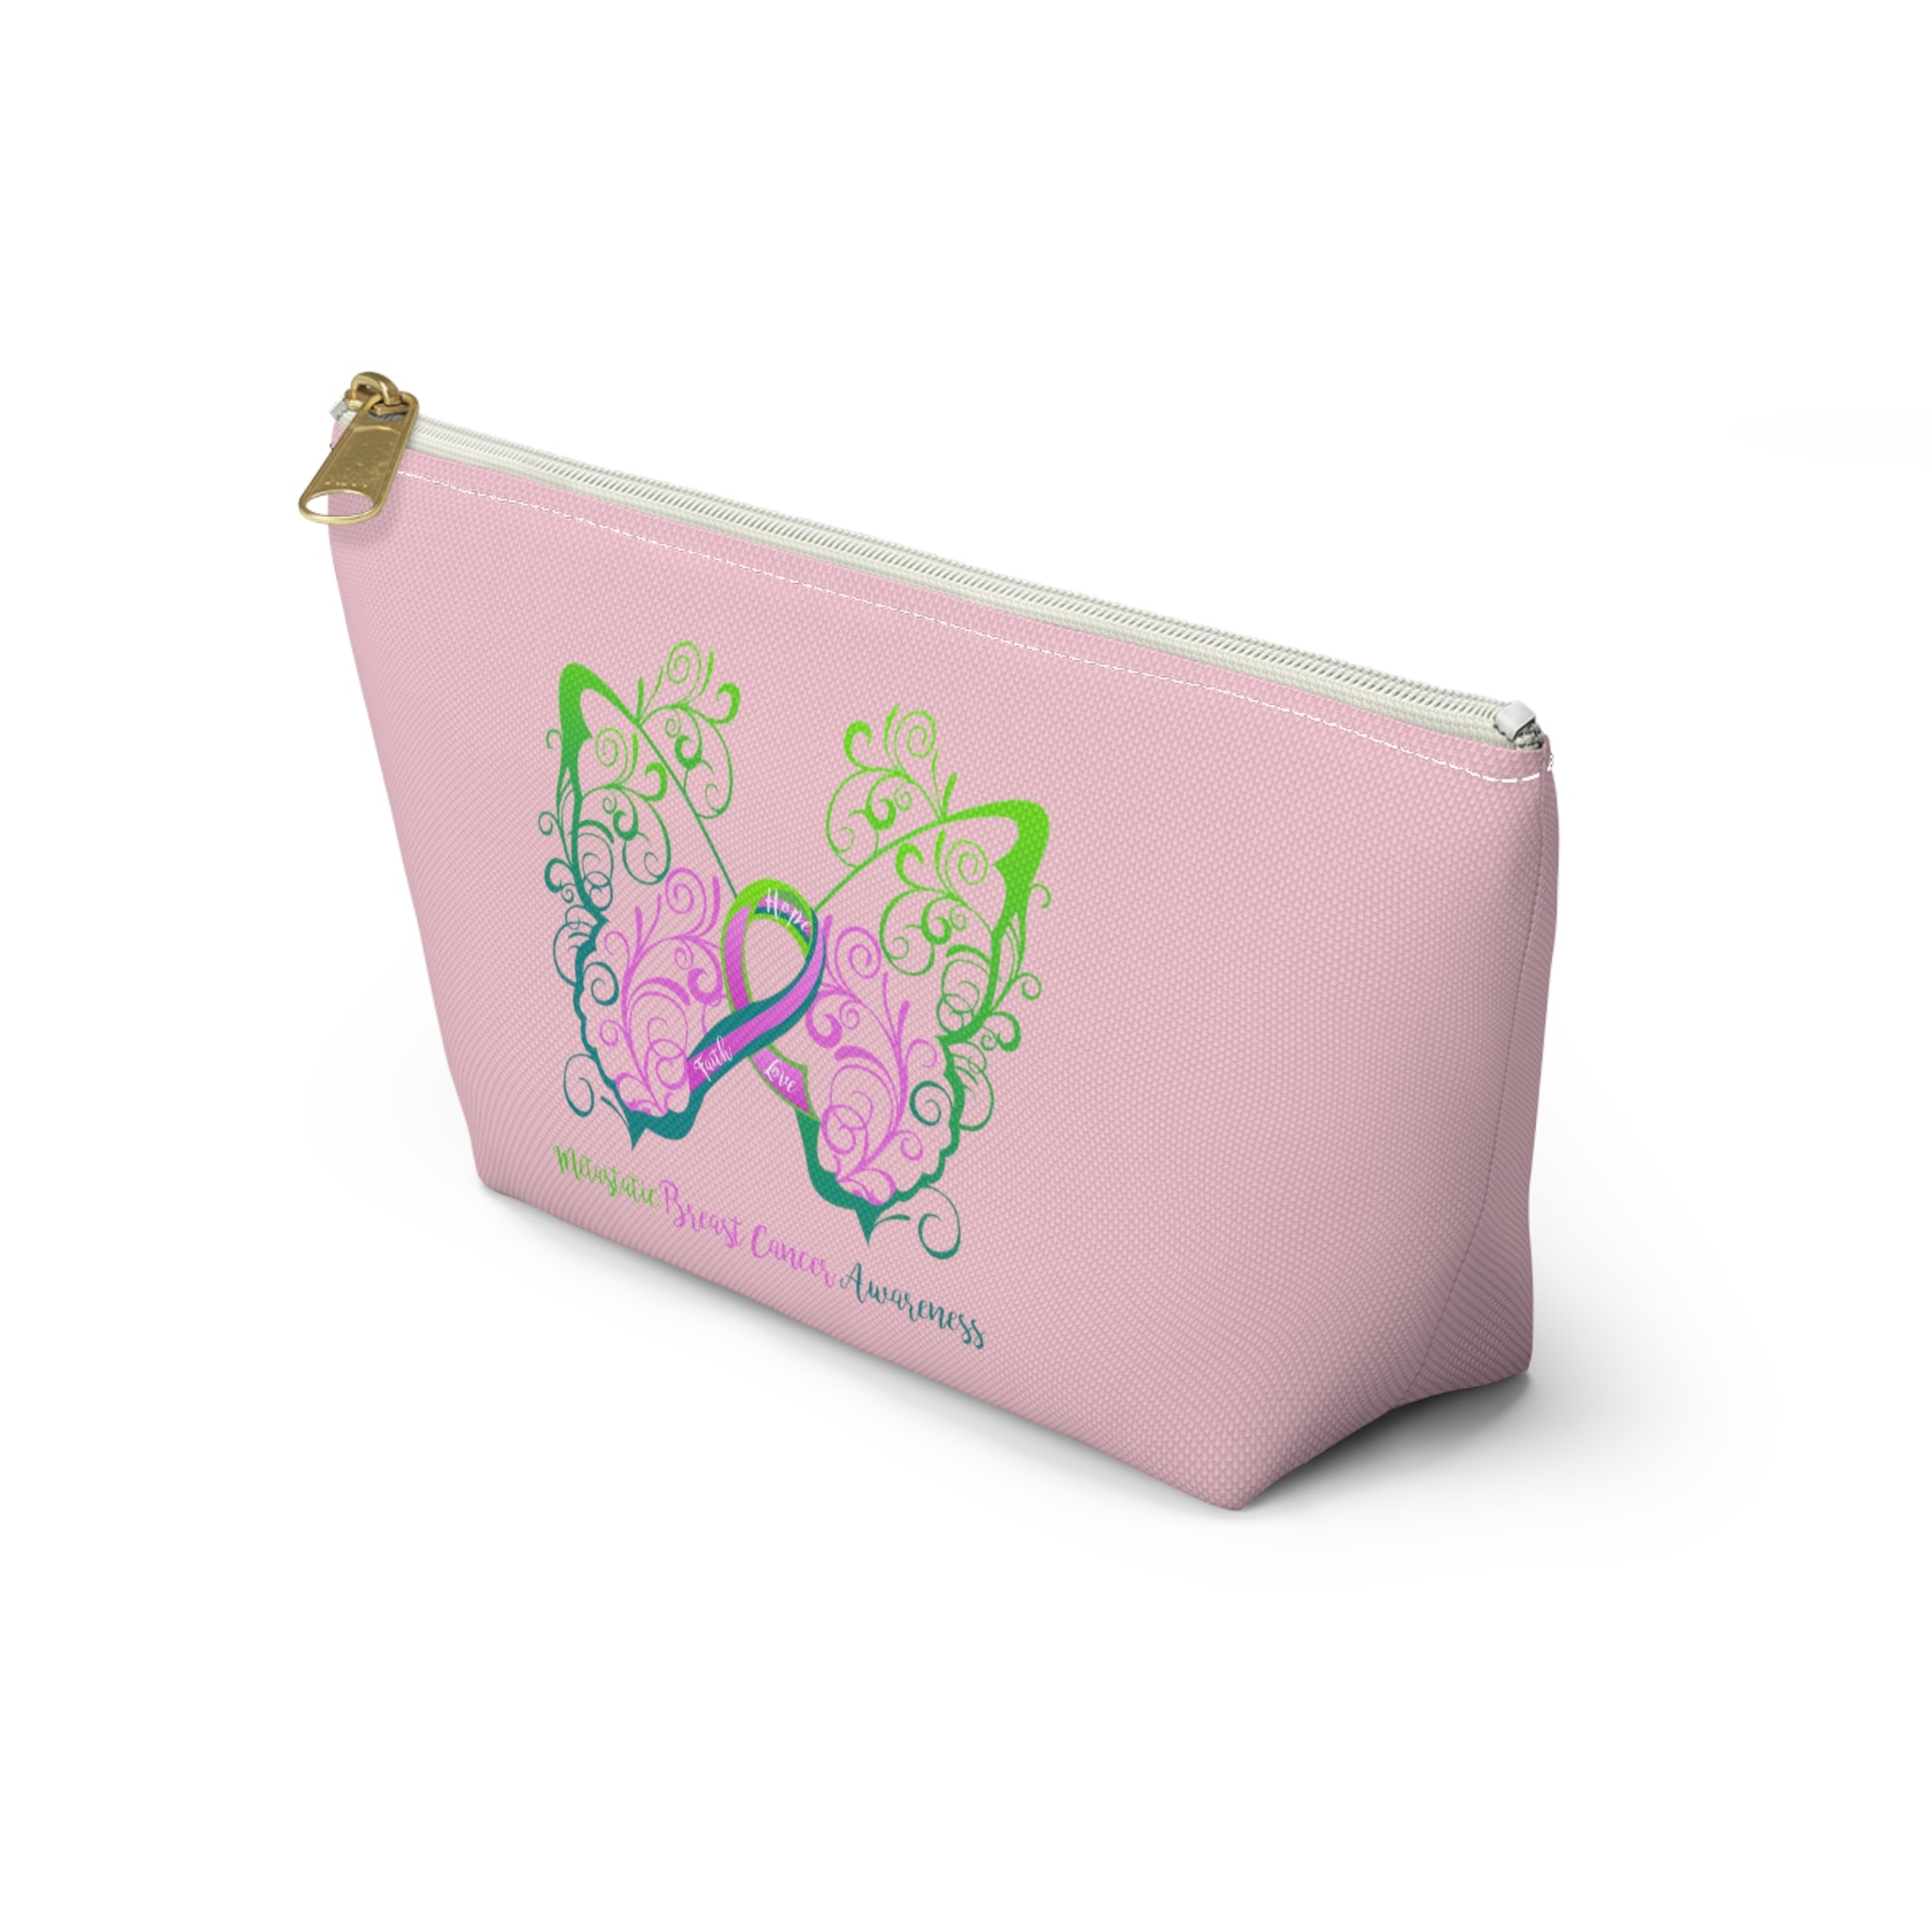 Shop for Breast Cancer Bags, Totes, Satchels & Purses | Think Pink Ribbon